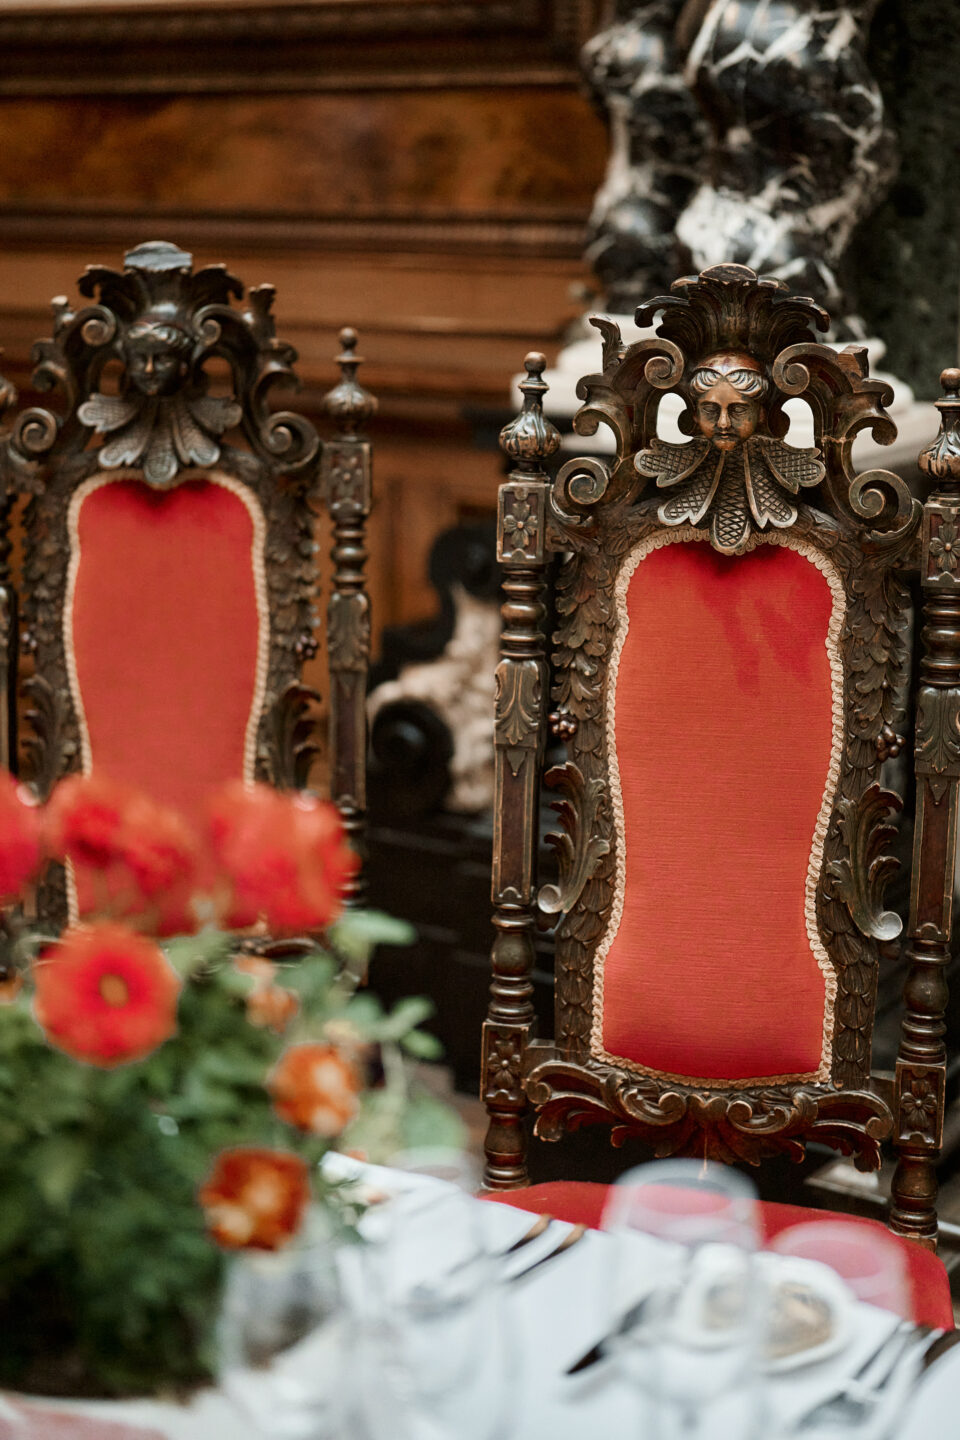 A fancy table with red chairs and flowers.